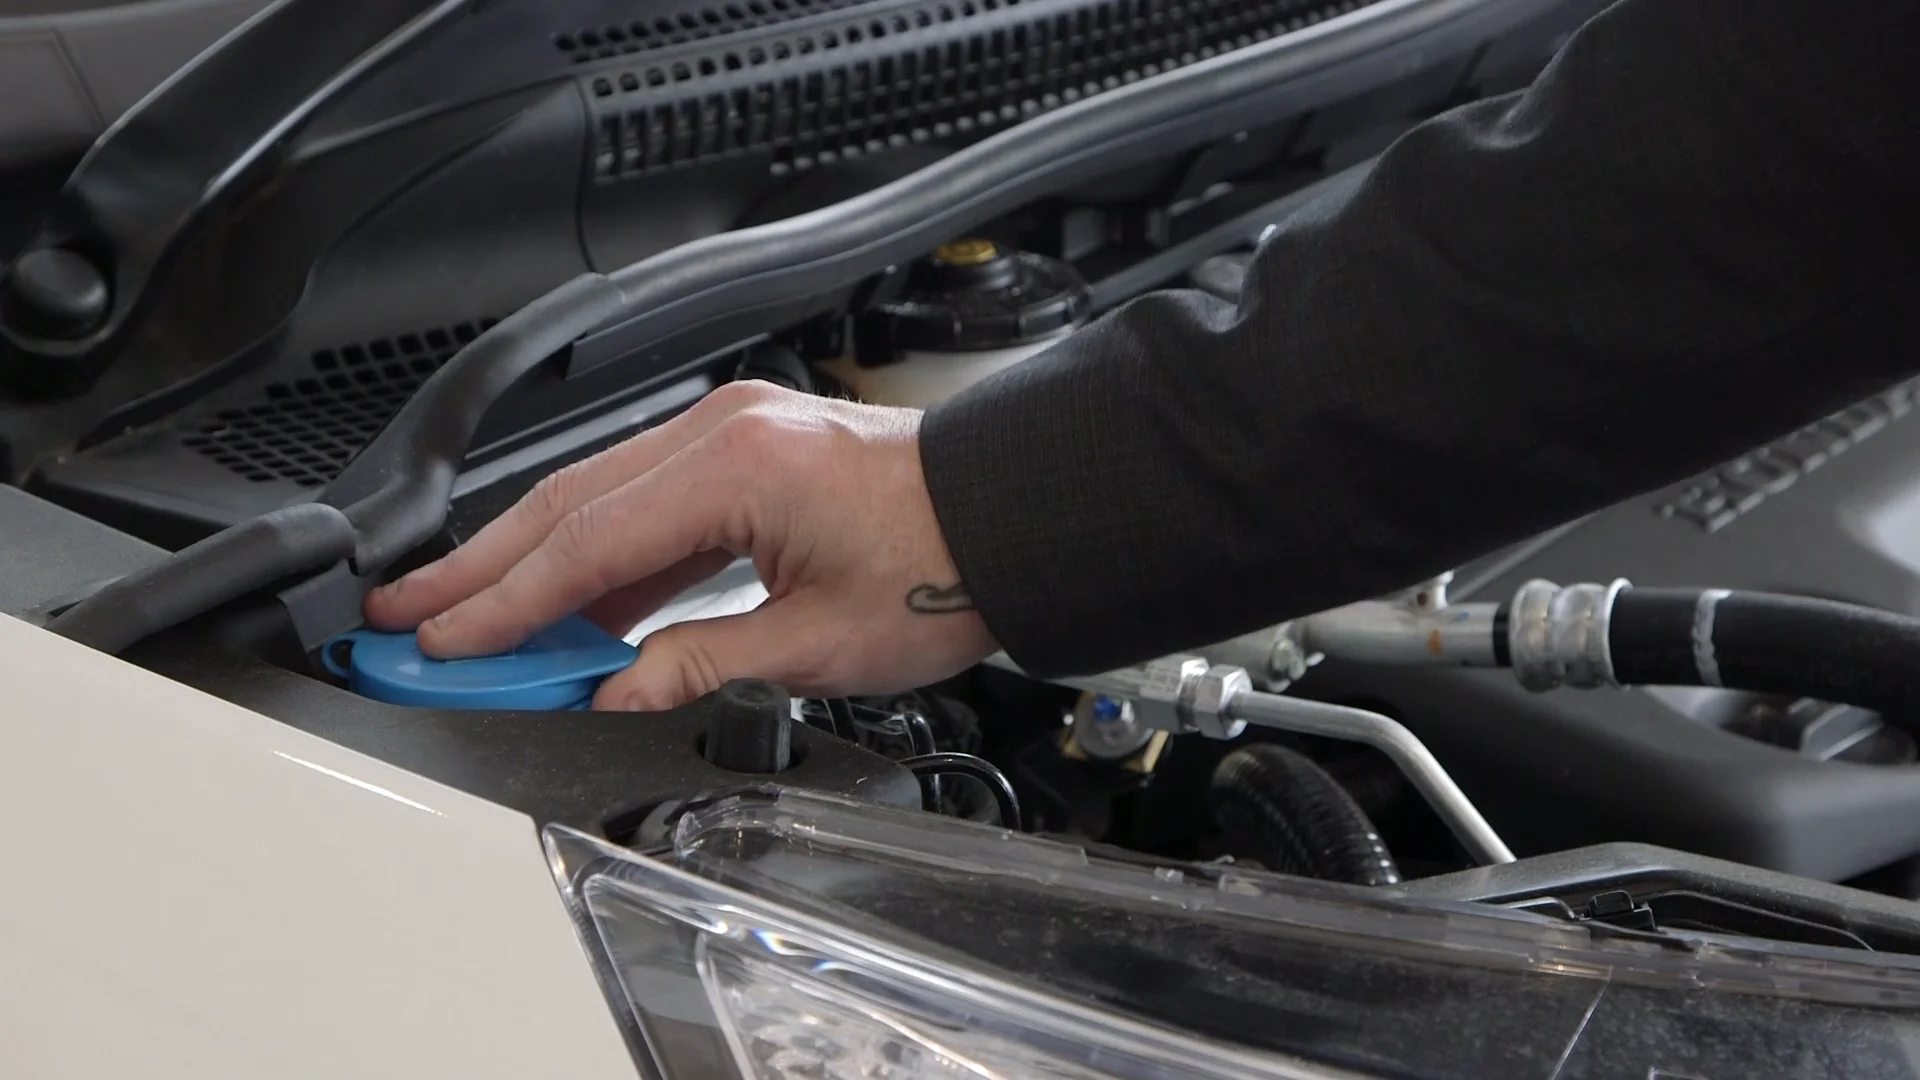 How to refill the windscreen washer fluid in the Honda CR-V on Vimeo